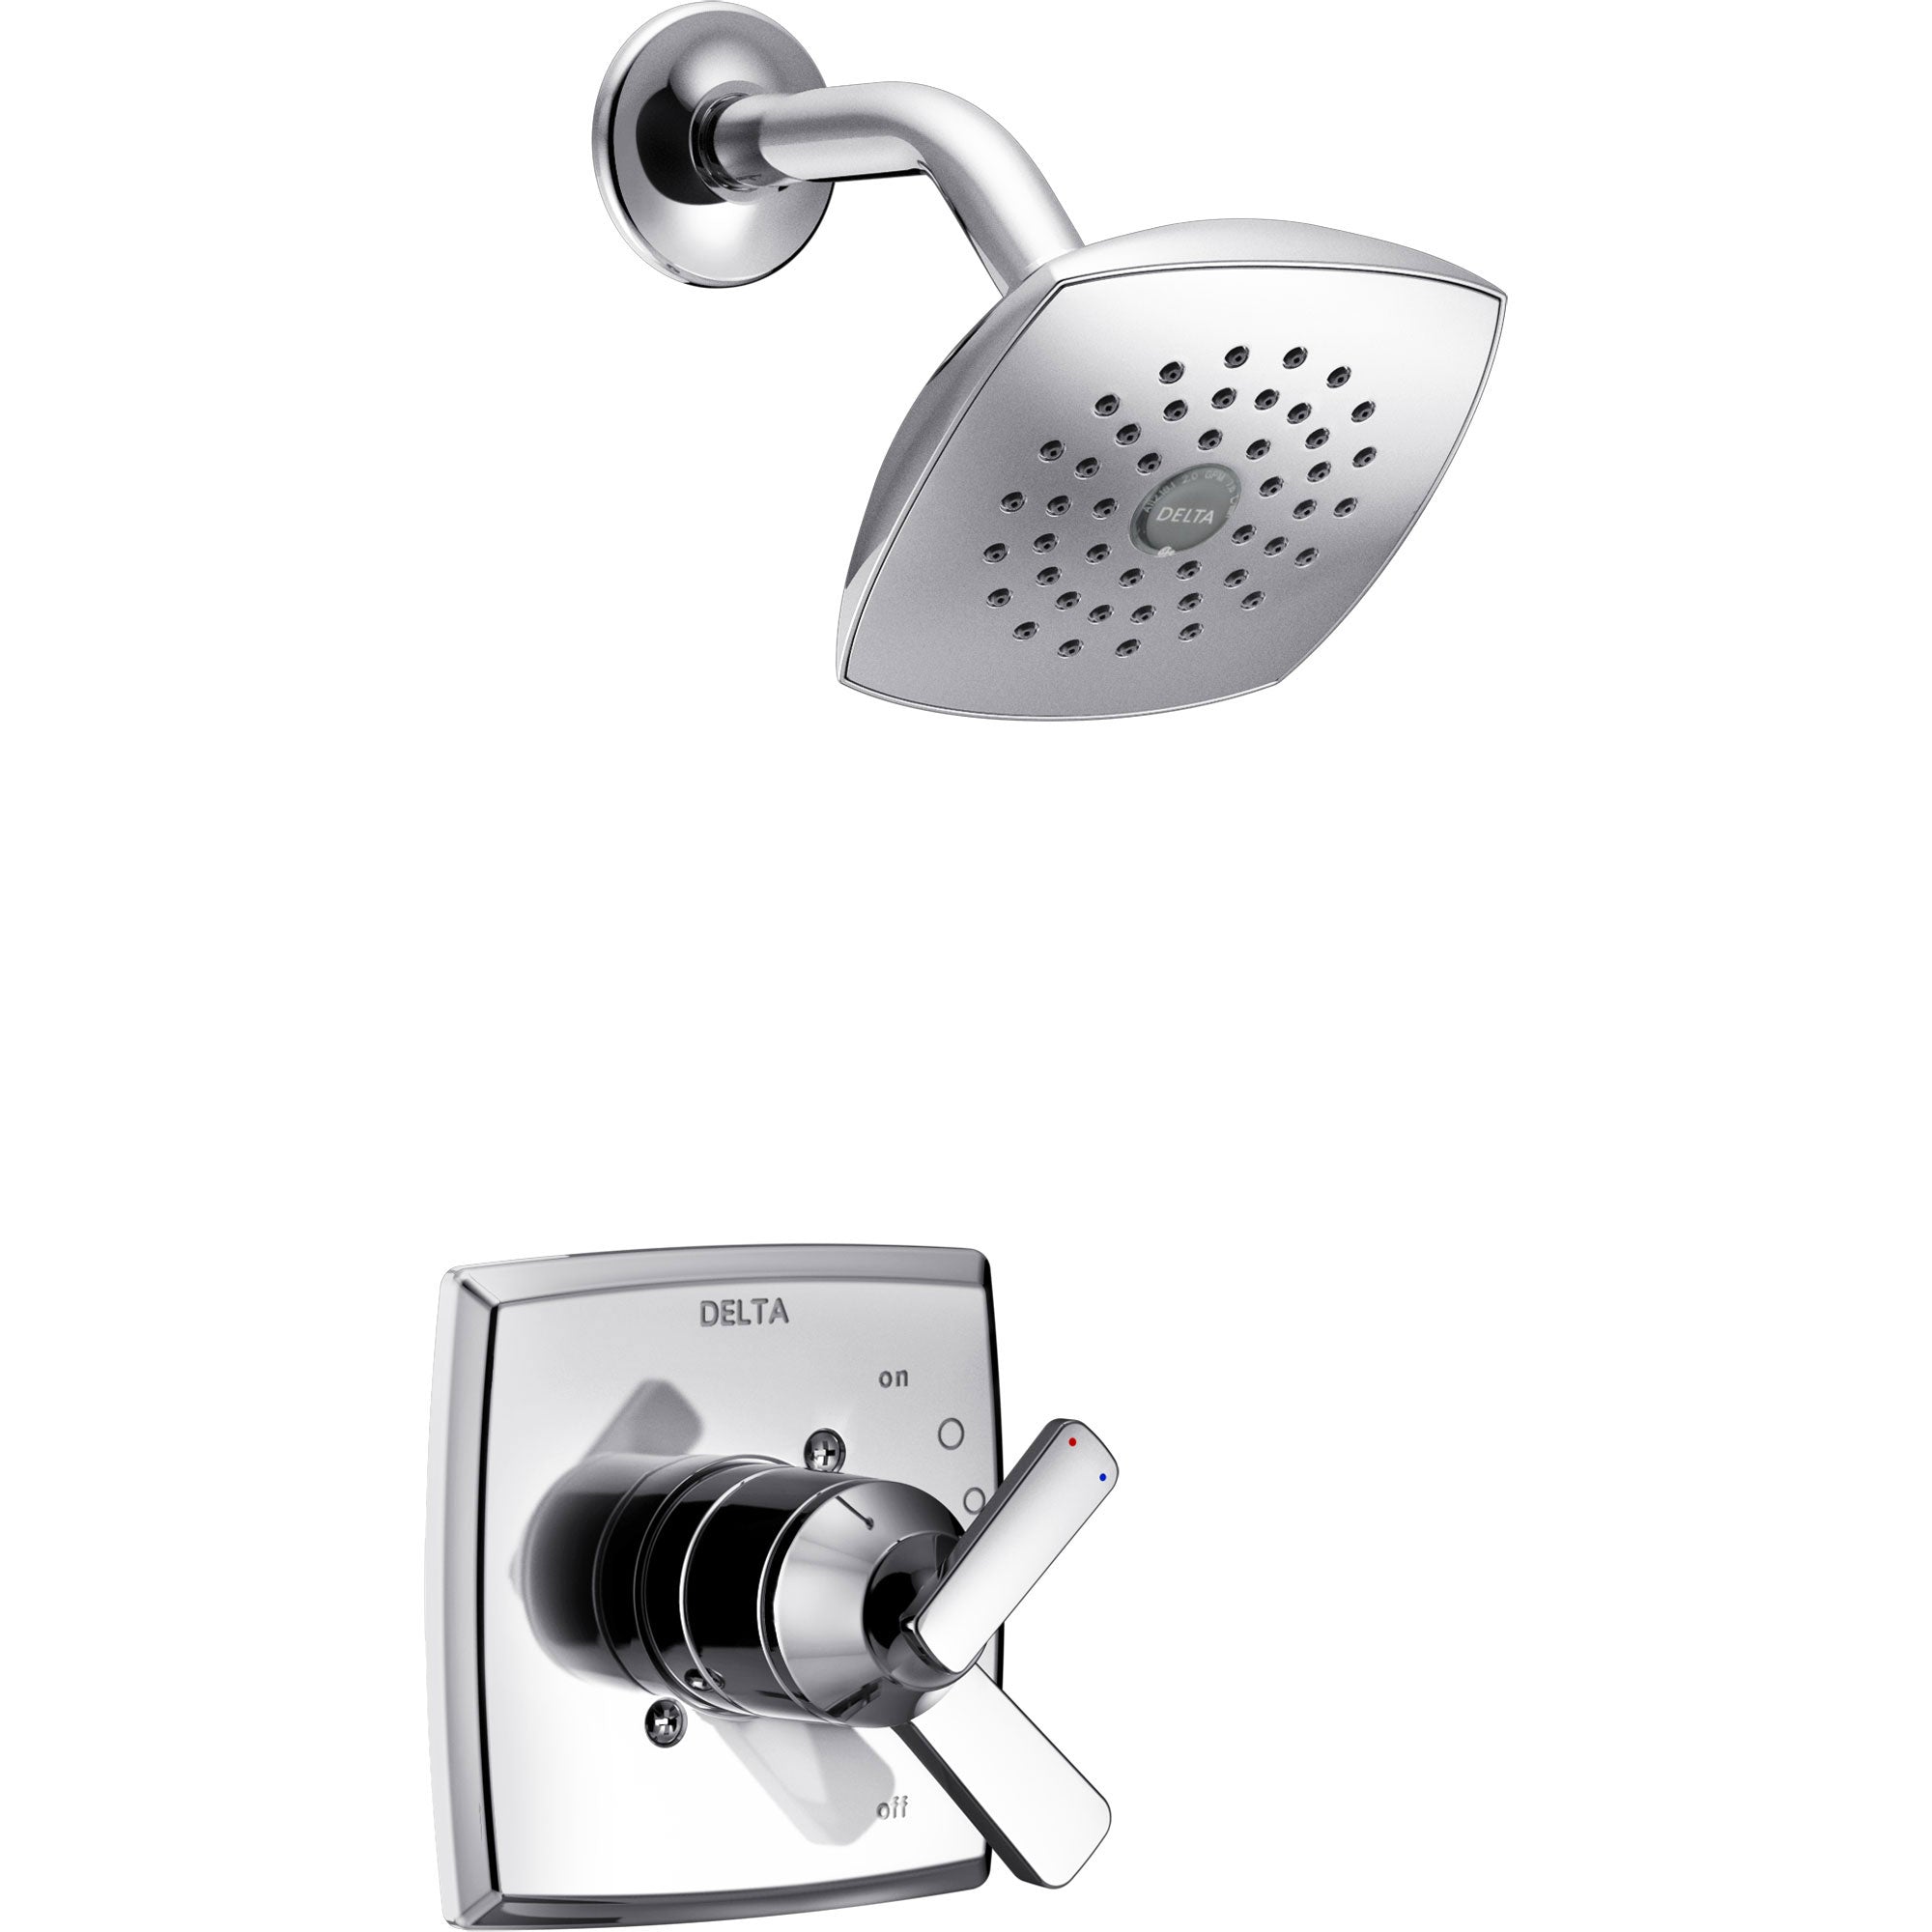 Delta Ashlyn Chrome Finish Monitor 17 Series Shower Only Faucet with Dual Temperature and Pressure Control INCLUDES Rough-in Valve with Stops D1143V